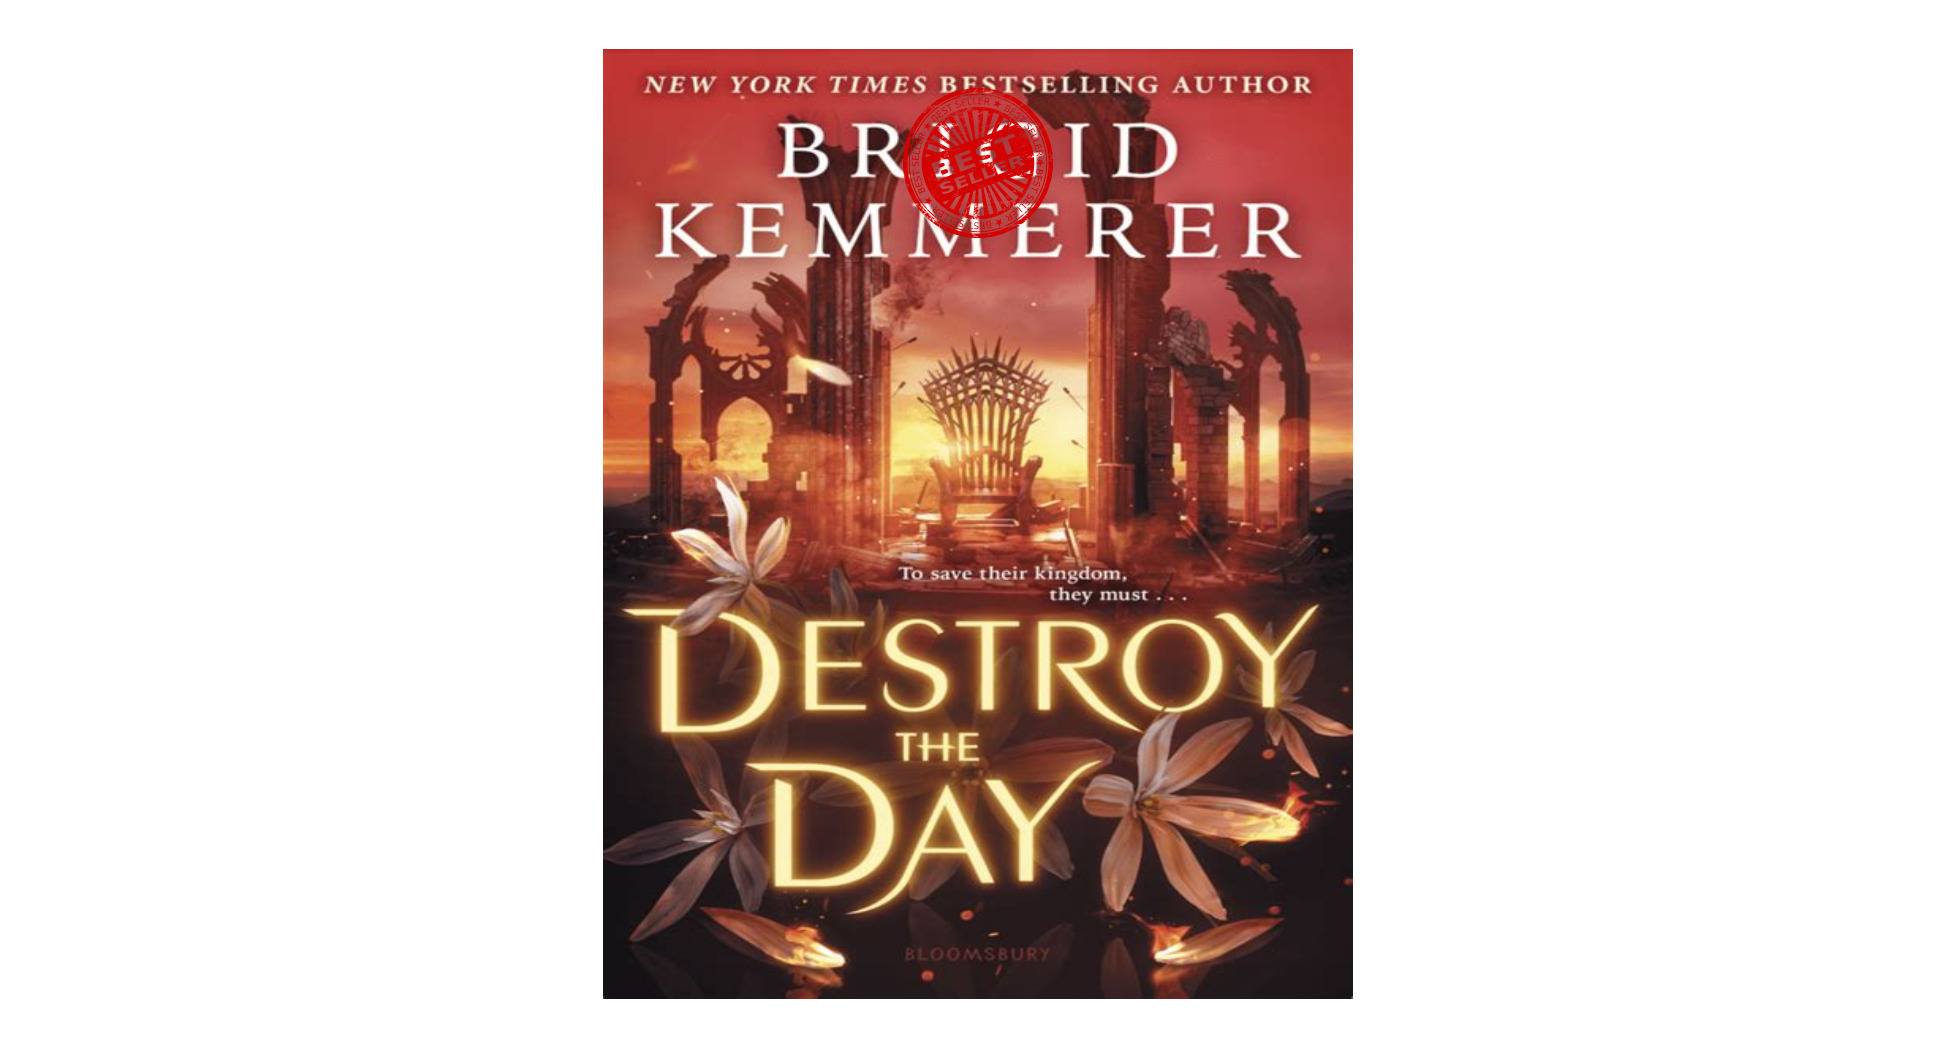 (Downloads) [PDF/BOOK] Destroy the Day (Defy the Night, #3) by Brigid Kemmerer Full Page_e0461346_20233904.jpg